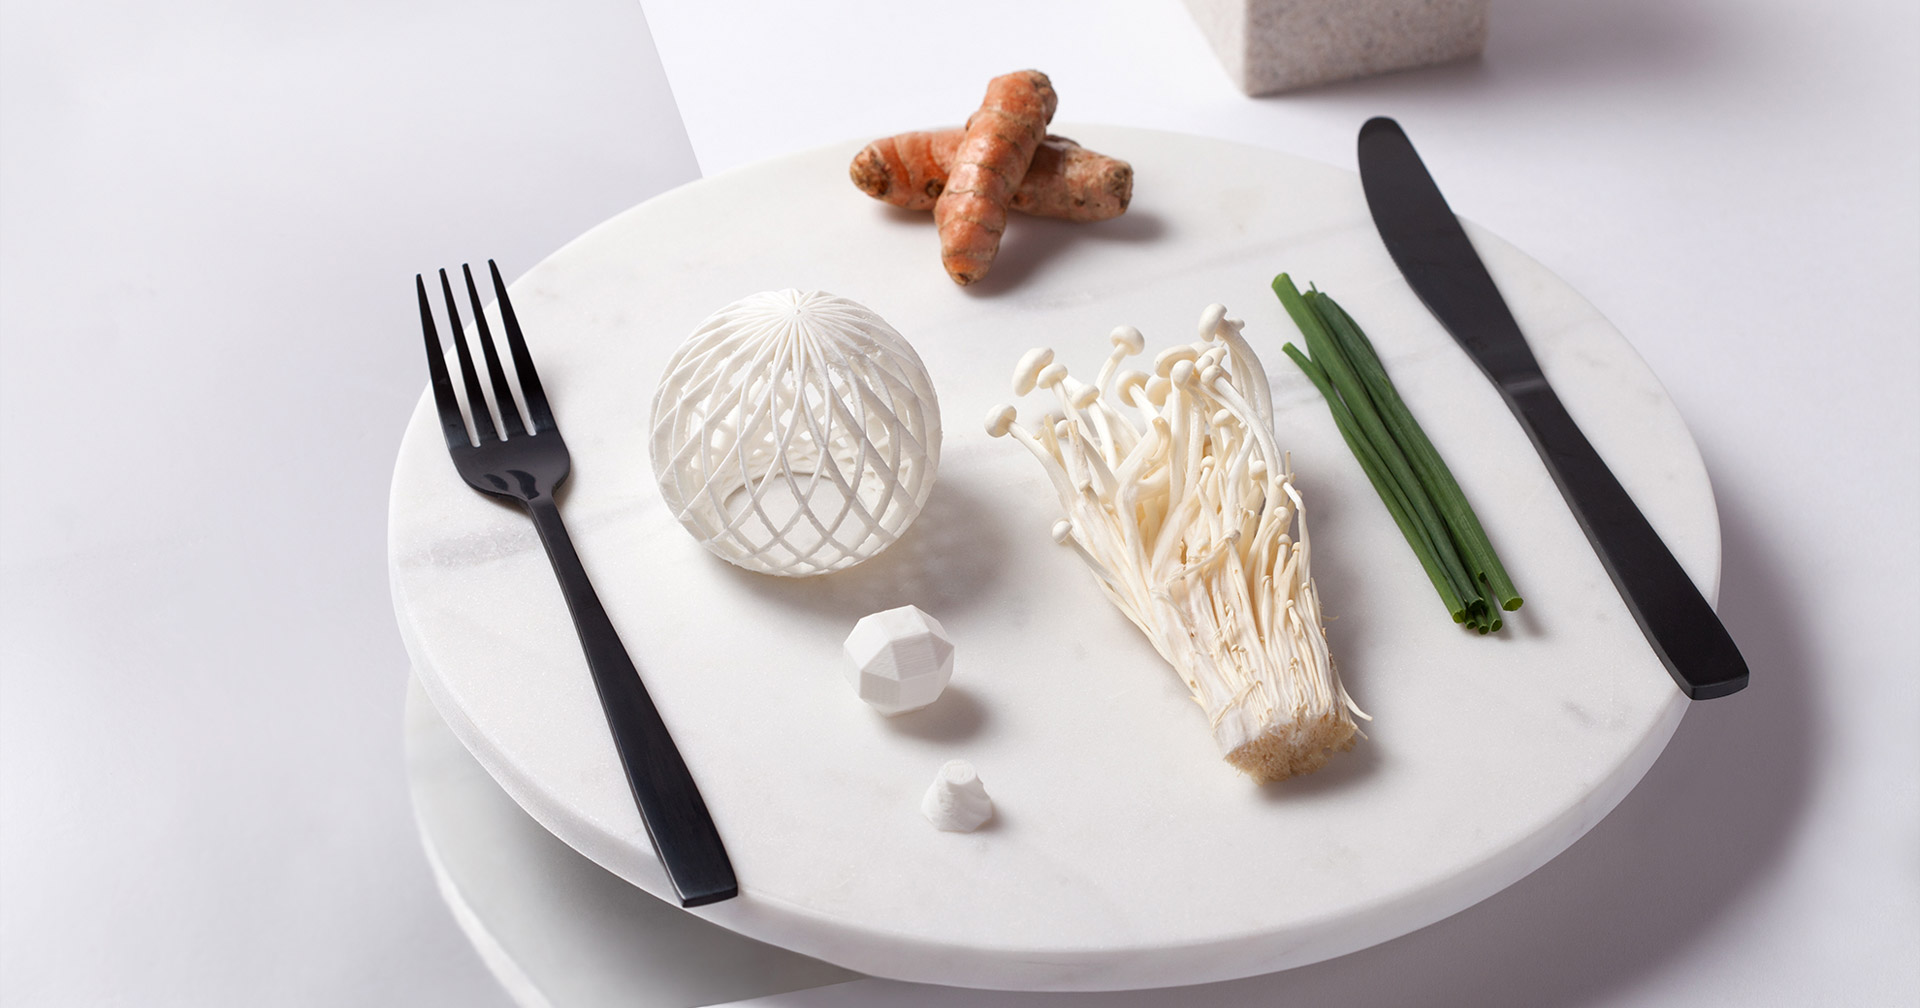 You’ve Got Meal: 3D Printed Food (Matters Journal)